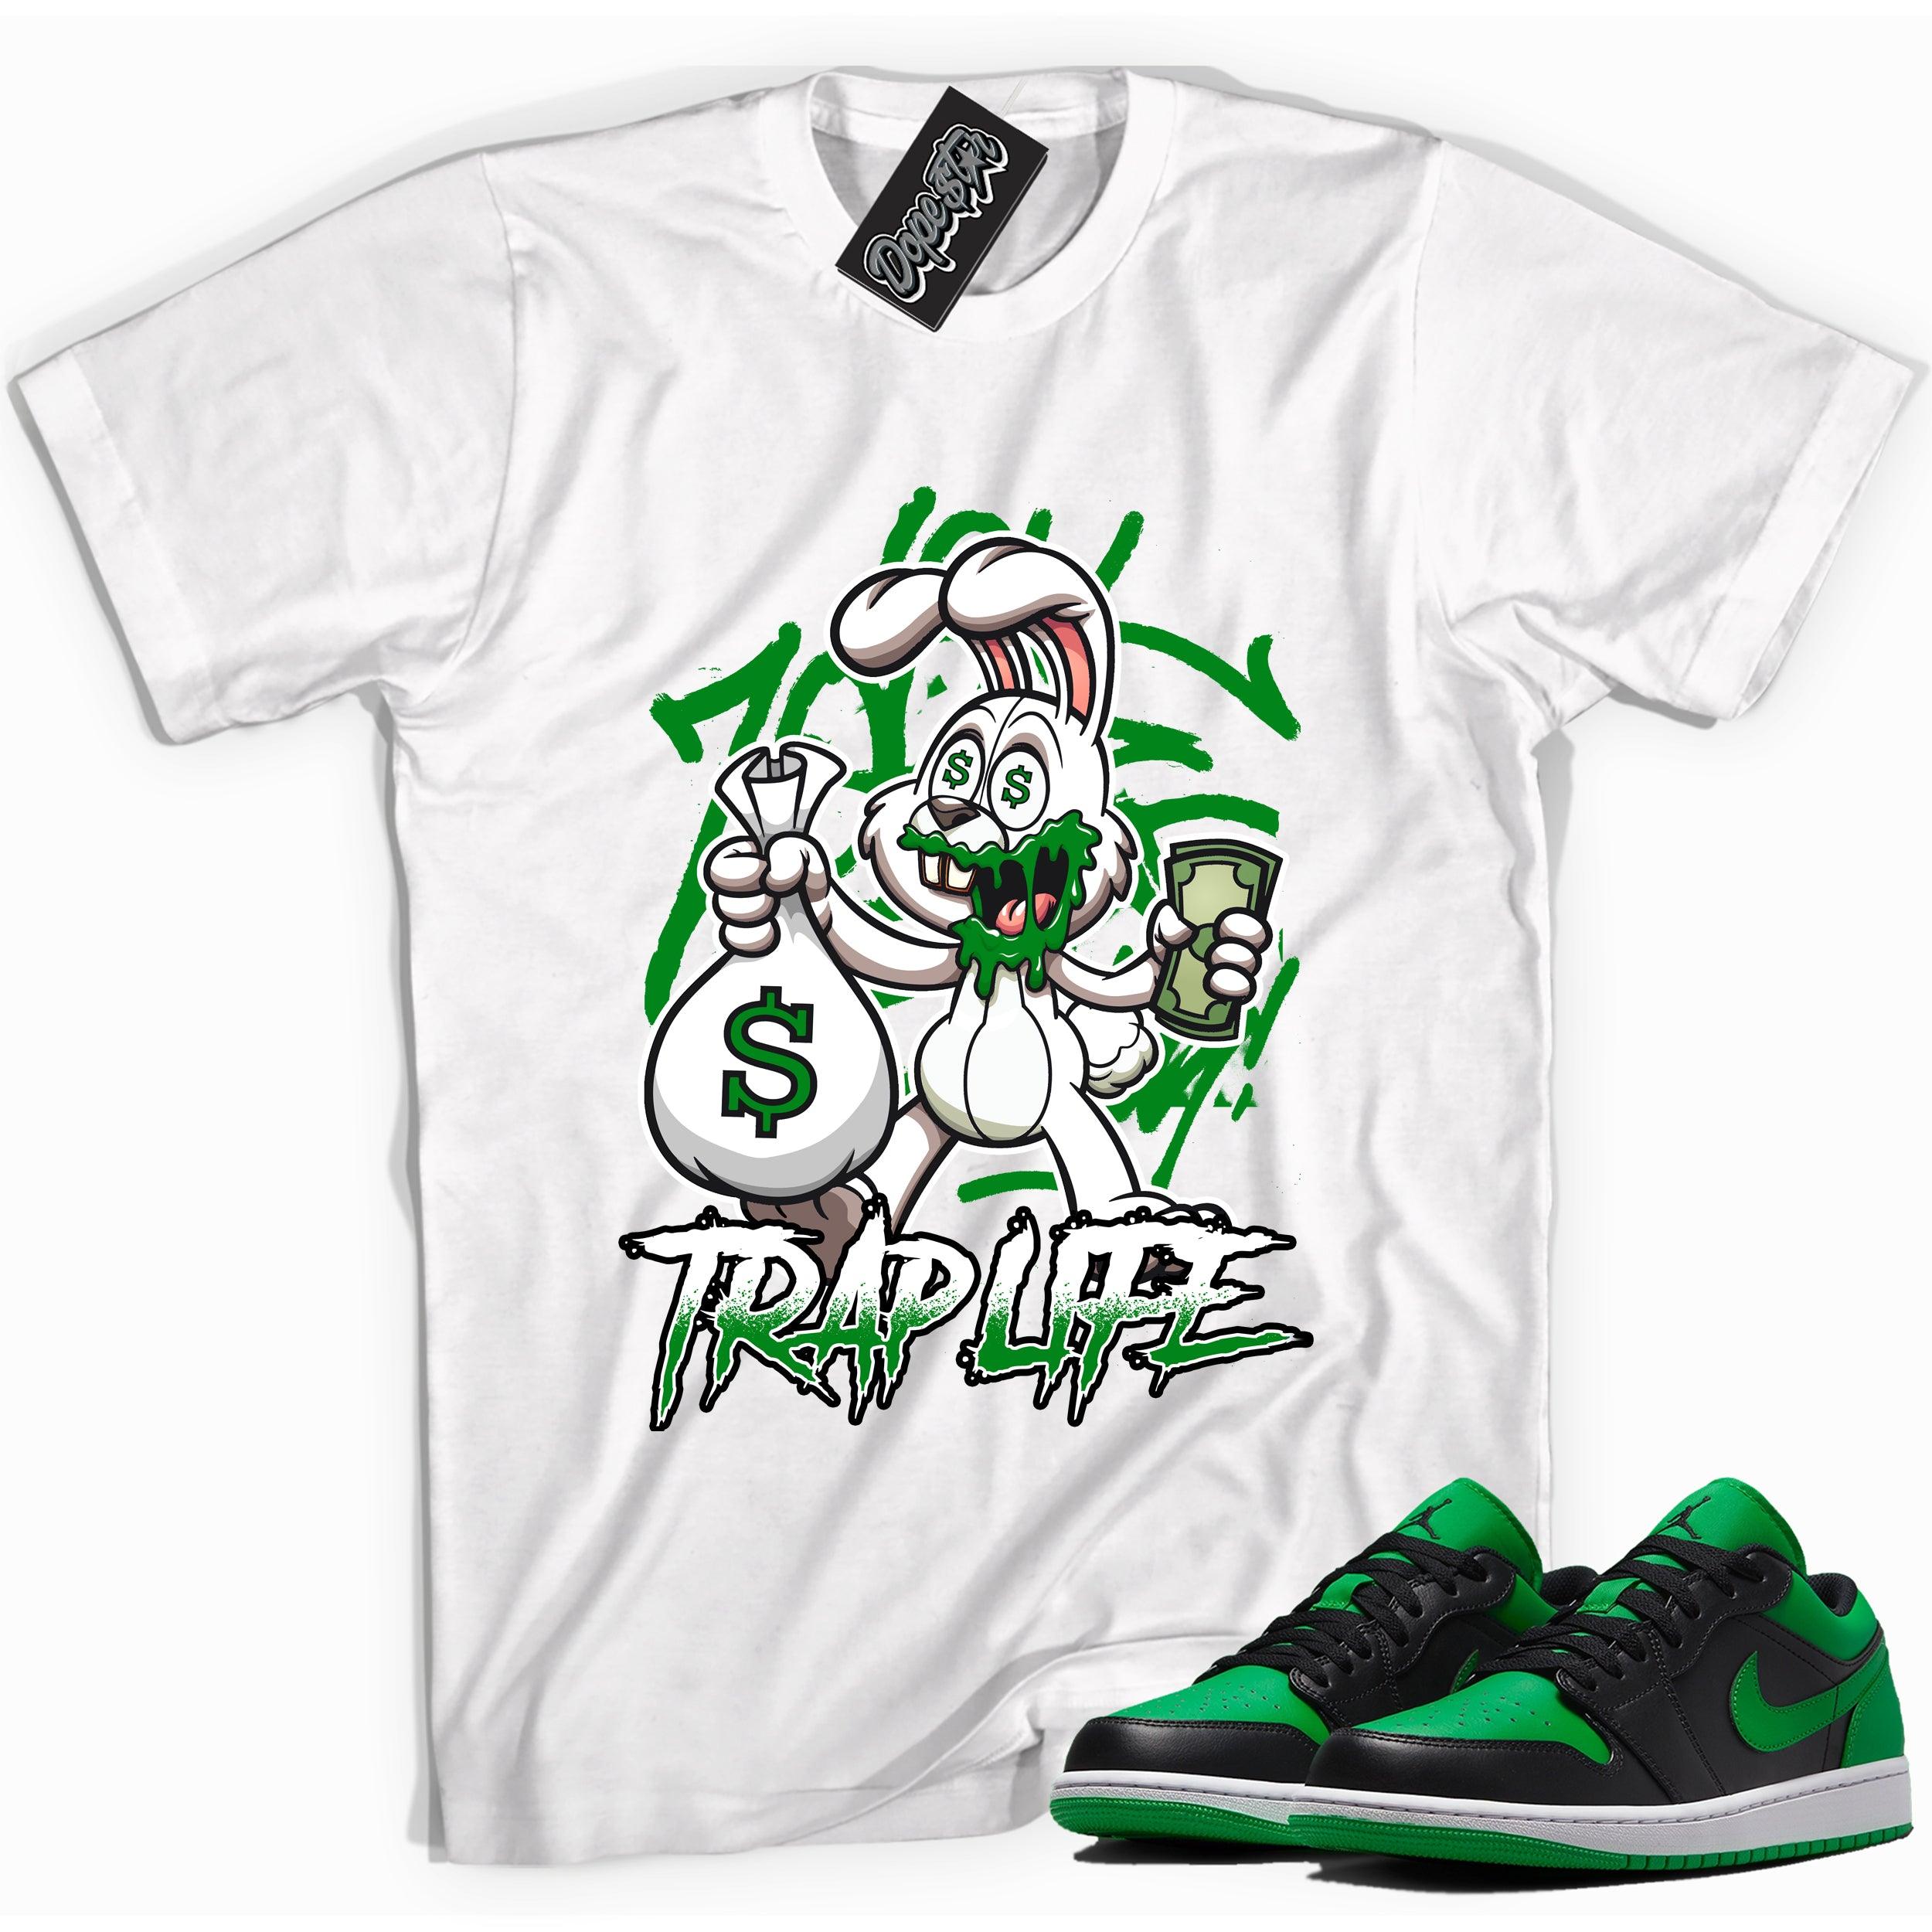 Cool white graphic tee with 'trap life rabbit' print, that perfectly matches Air Jordan 1 Low Lucky Green sneakers